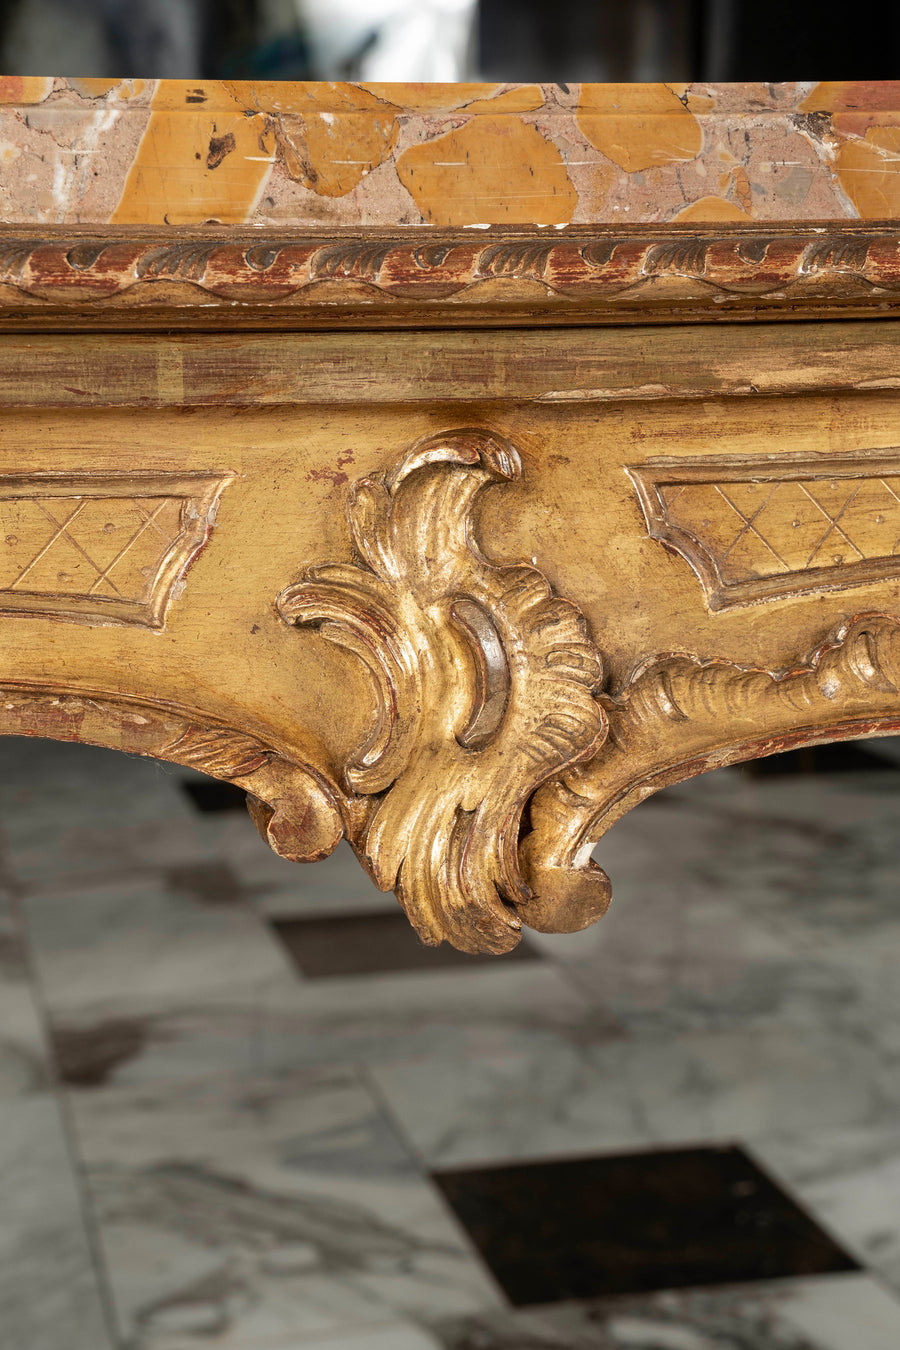 18th Century French Louis XV Giltwood Marble Top Table